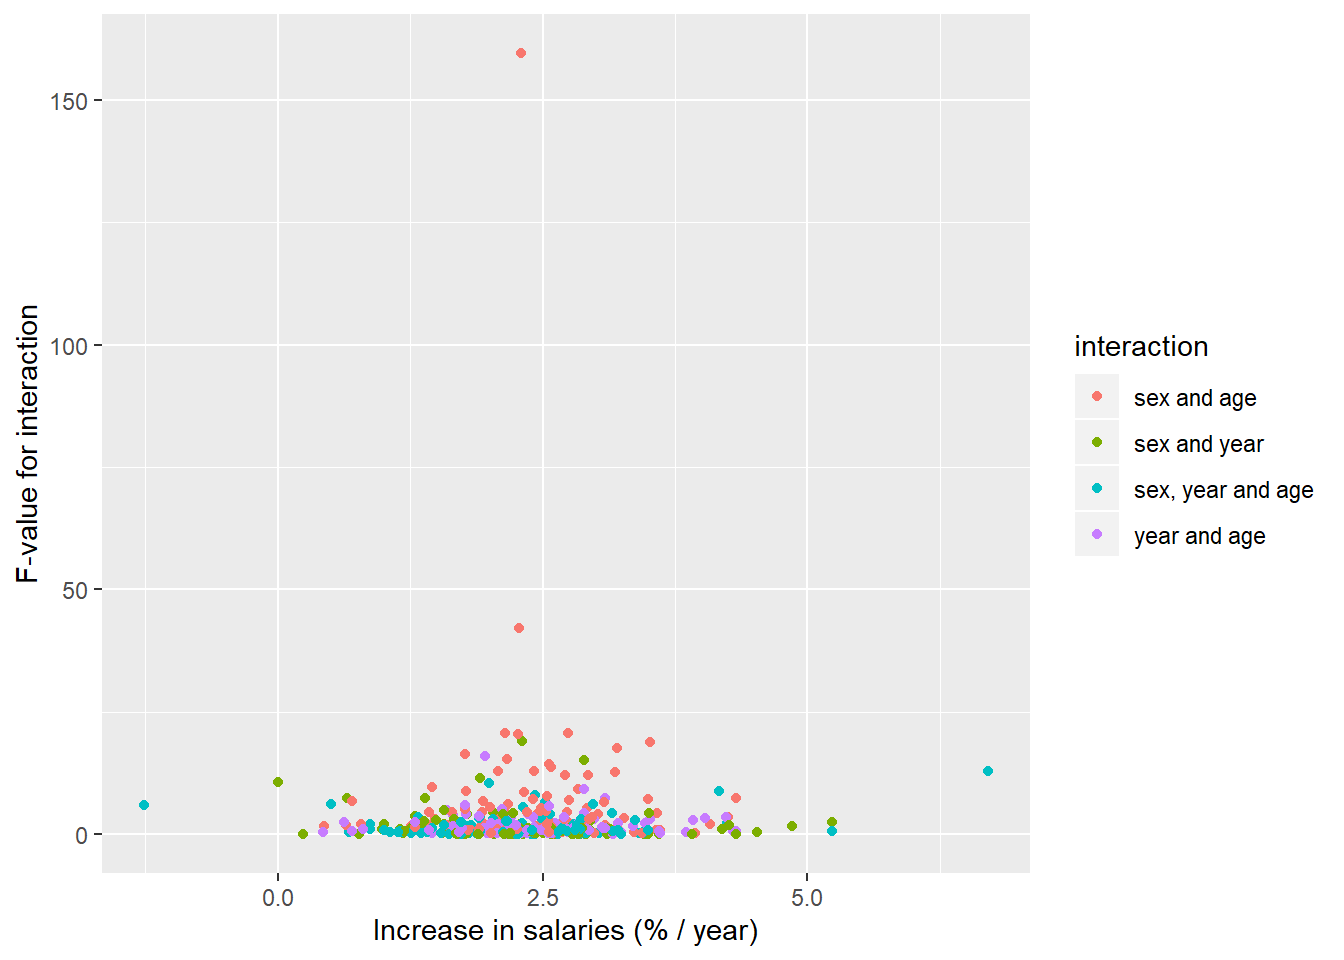 The significance of the interaction between age, year, sex on the salary in Sweden, a comparison between different occupational groups, Year 2014 - 2018